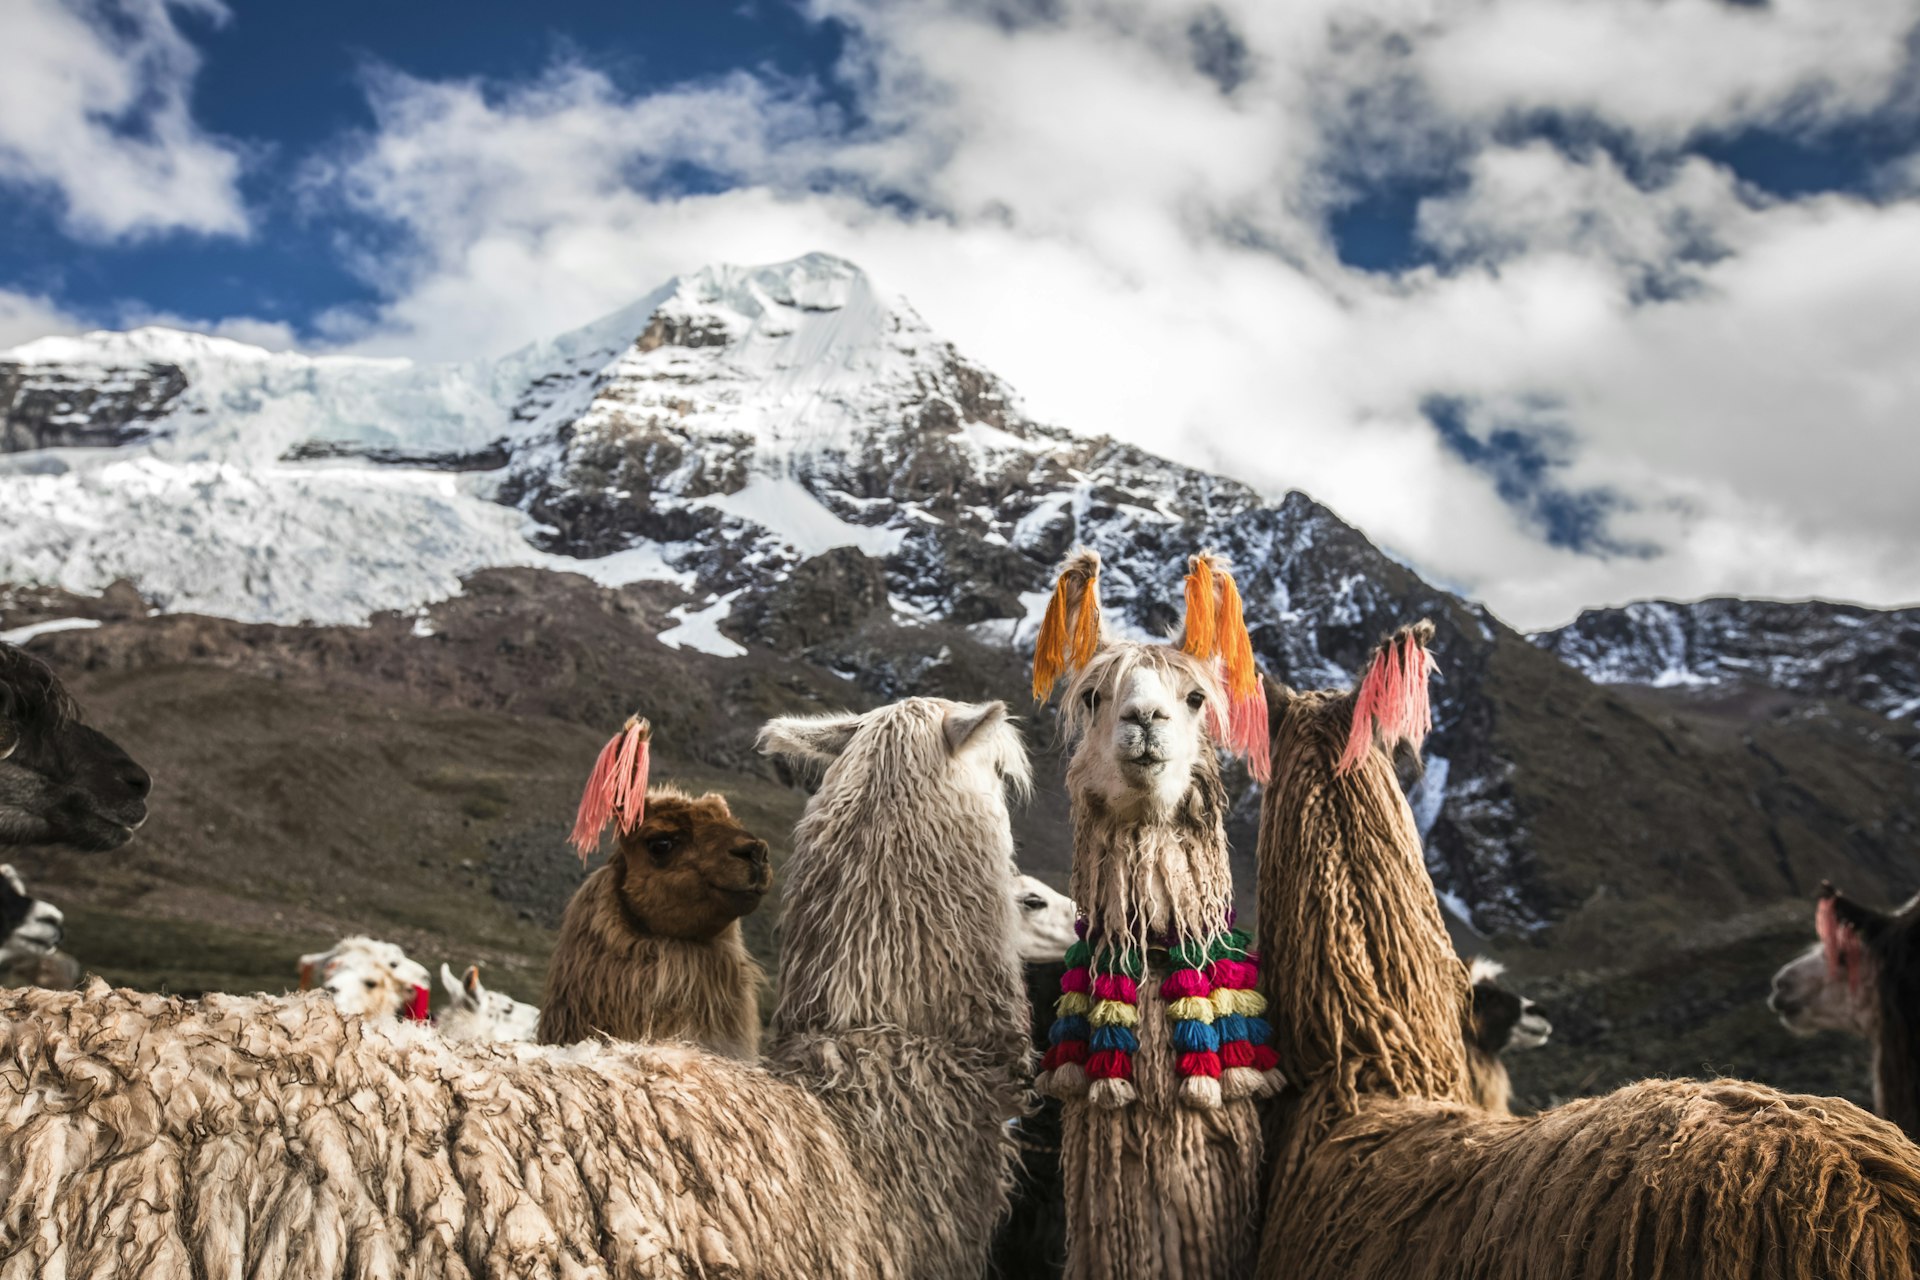 A llama wearing orange yarn from its ears looks directly into the camera. Colorful yarn balls hang from its neck. A pair of llamas face away from the camera while another wearing pink yarn on its ears faces the camera. In the background is a large snow-capped mountain.